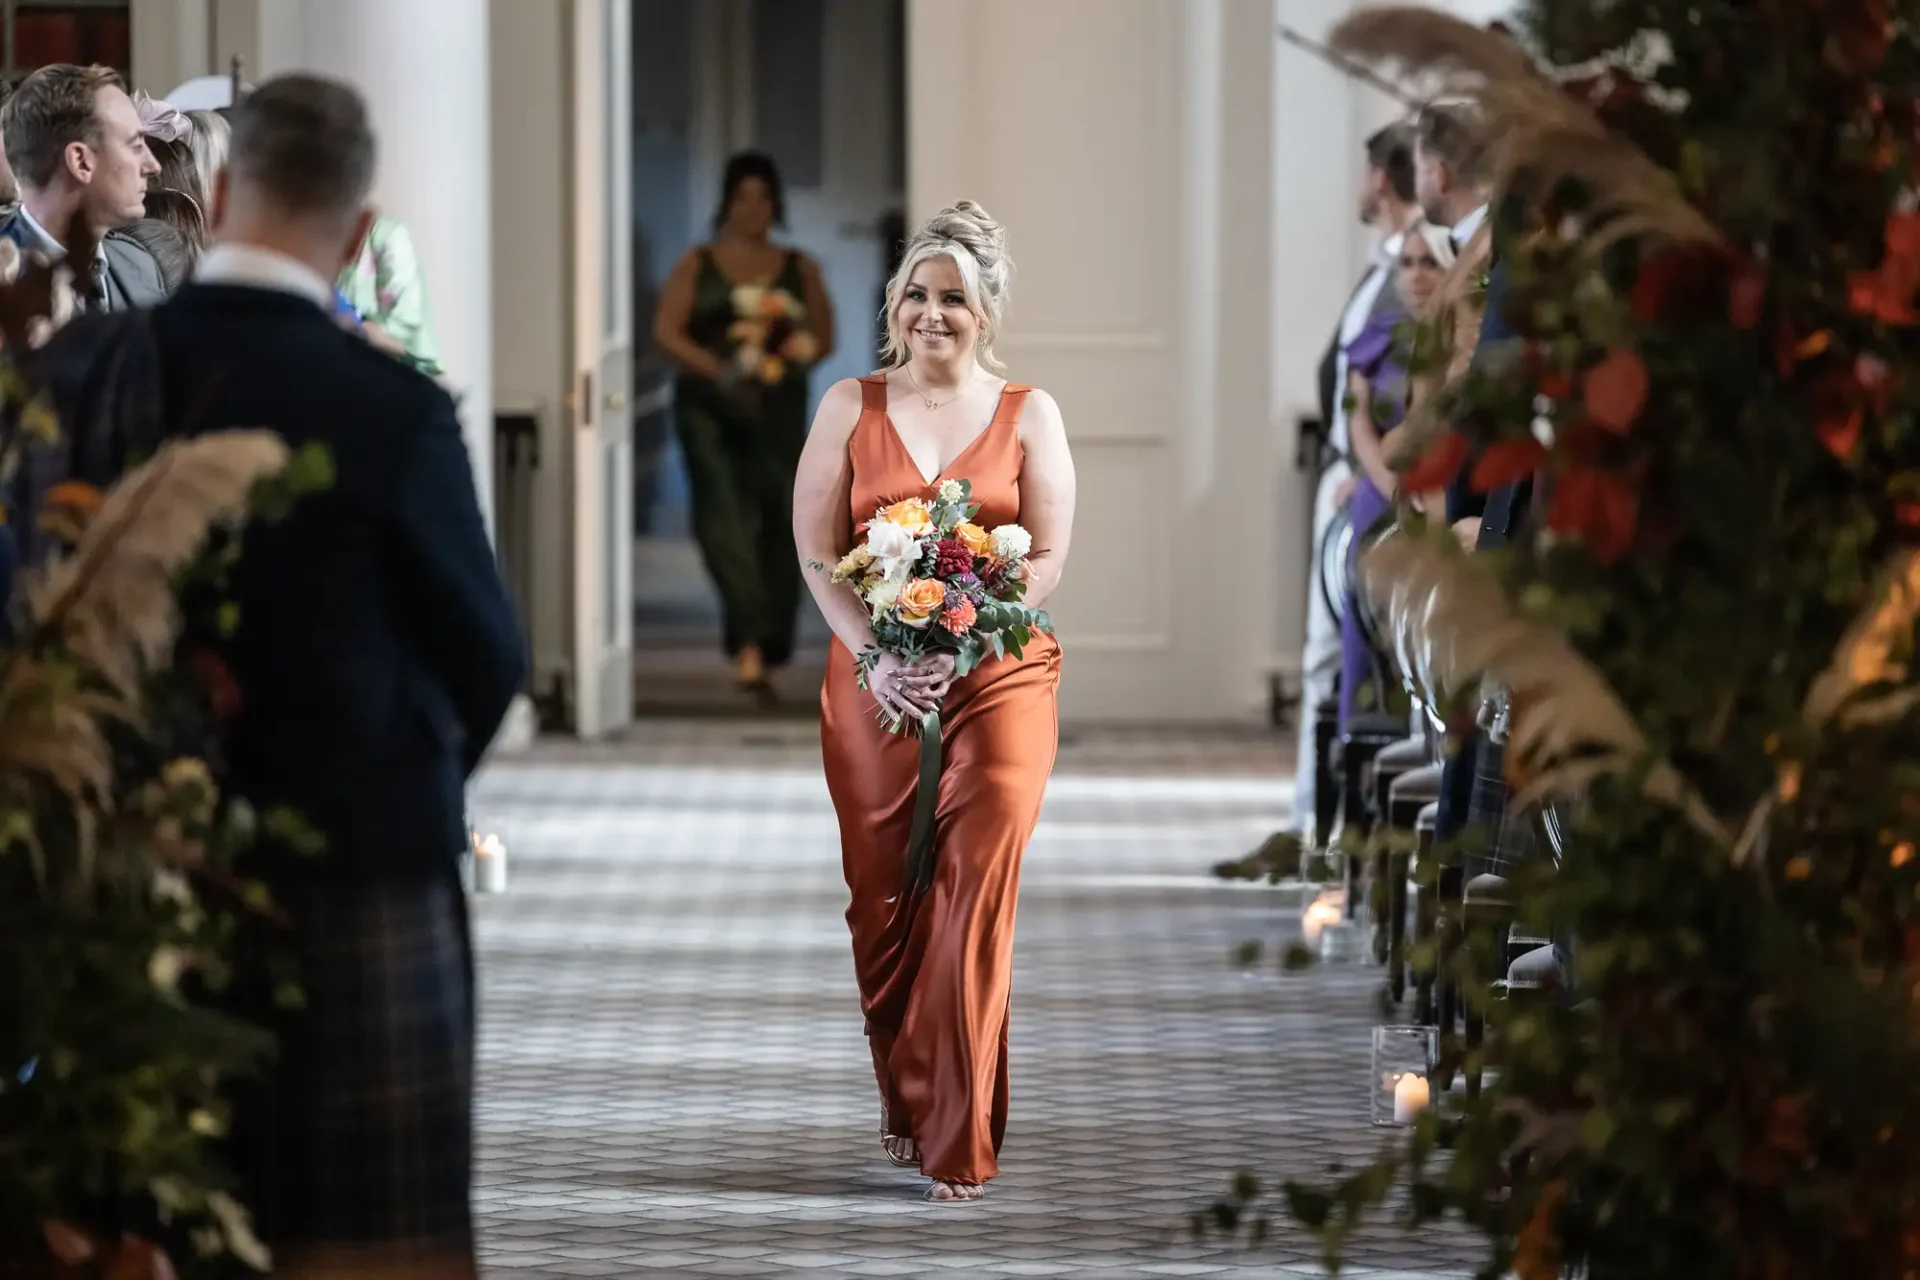 A woman in an orange dress smiles as she walks down an aisle holding a bouquet, flanked by seated guests and plant decorations.